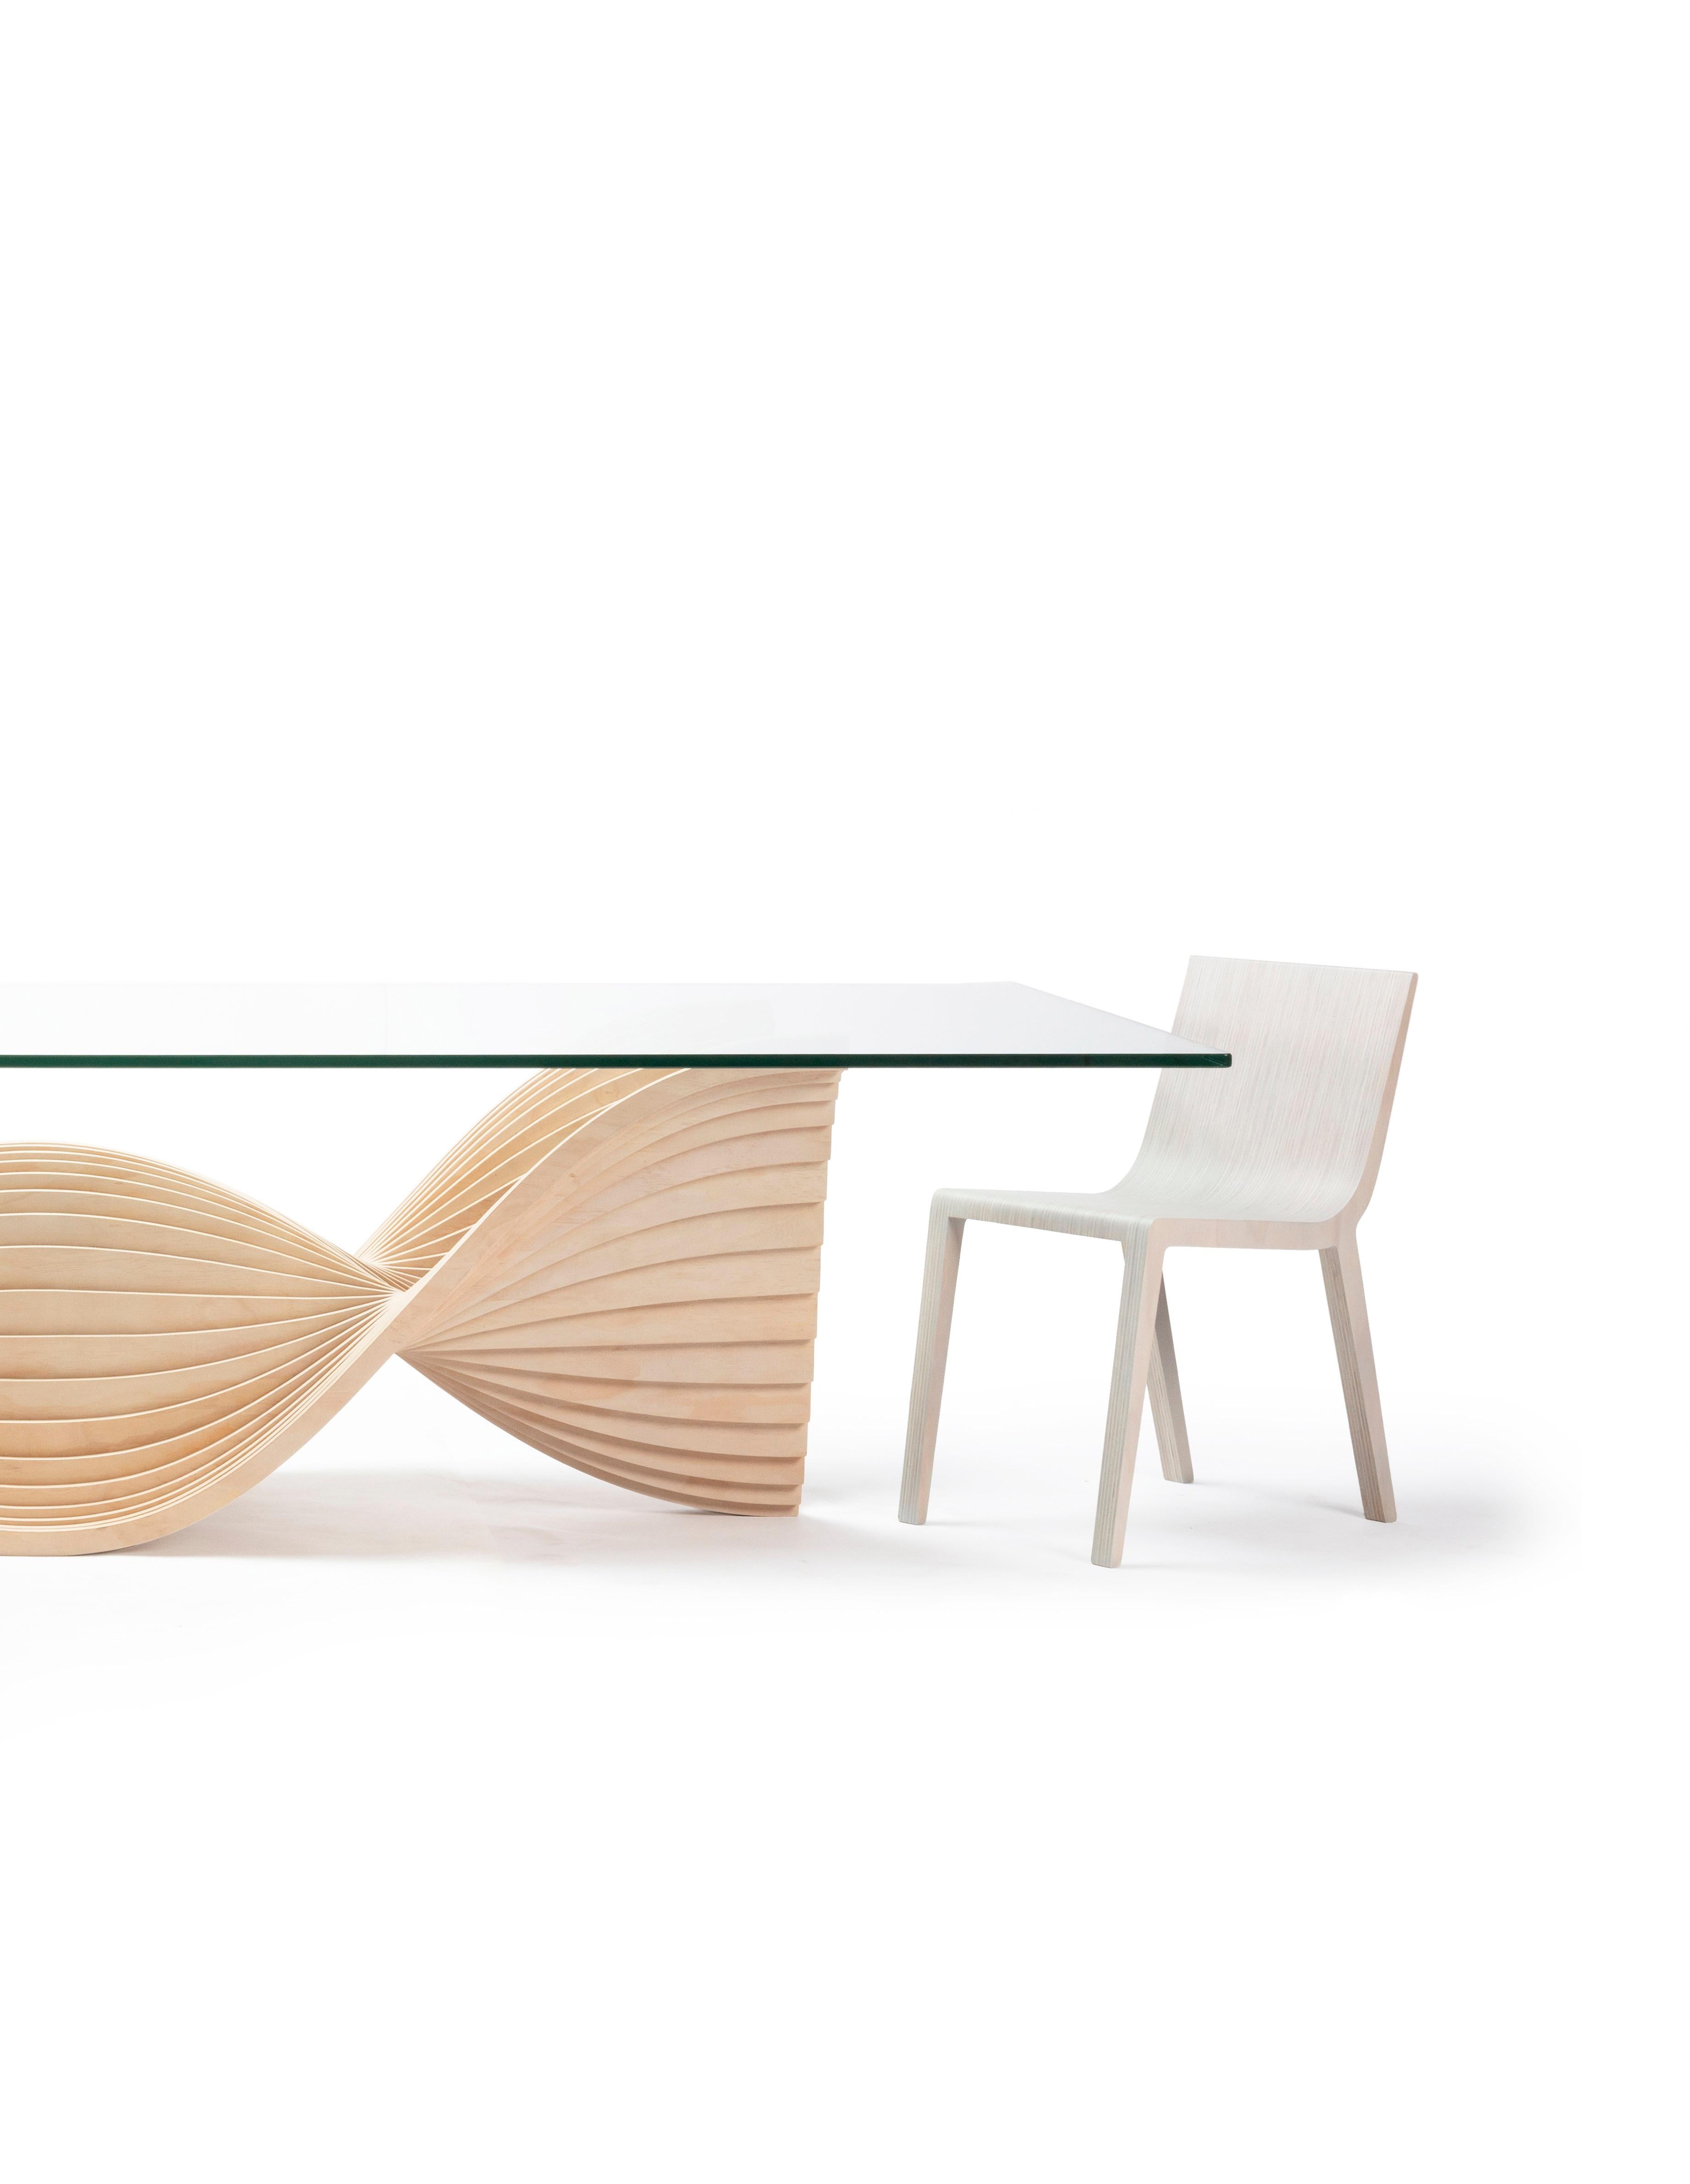 Guatemalan Y Chair by Piegatto, a Contemporary and Minimalist Chair For Sale